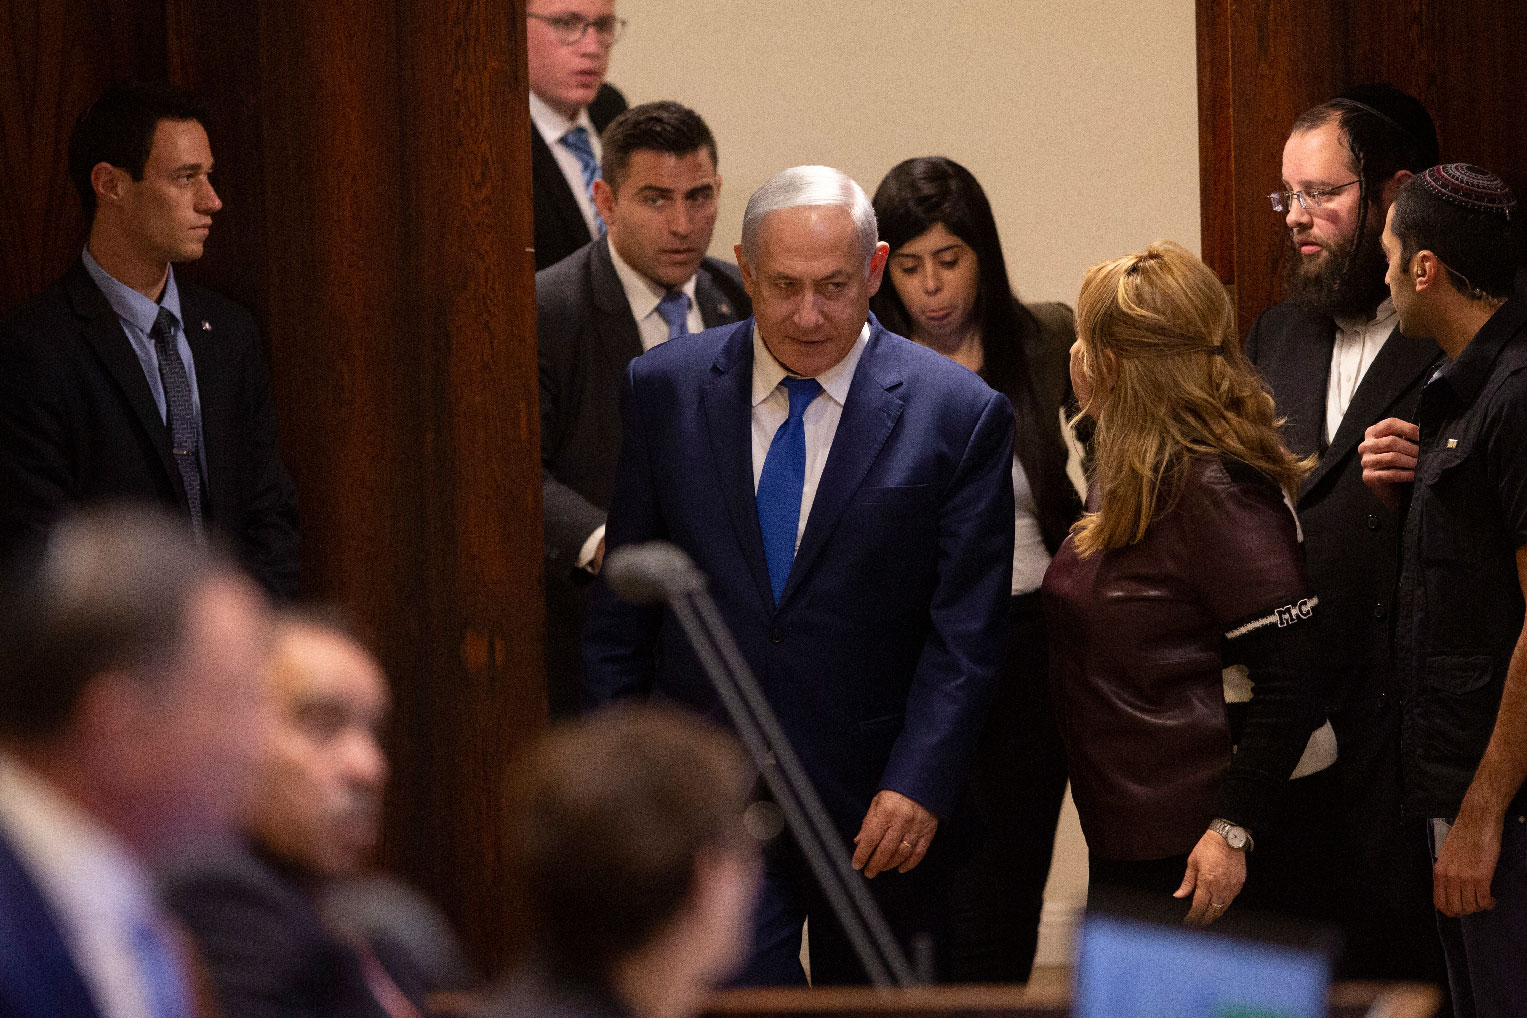 Israeli Prime Minister Benjamin Netanyahu walks in during a session at the Knesset, Israel's parliament in Jerusalem, Wednesday, Dec. 26, 2018.